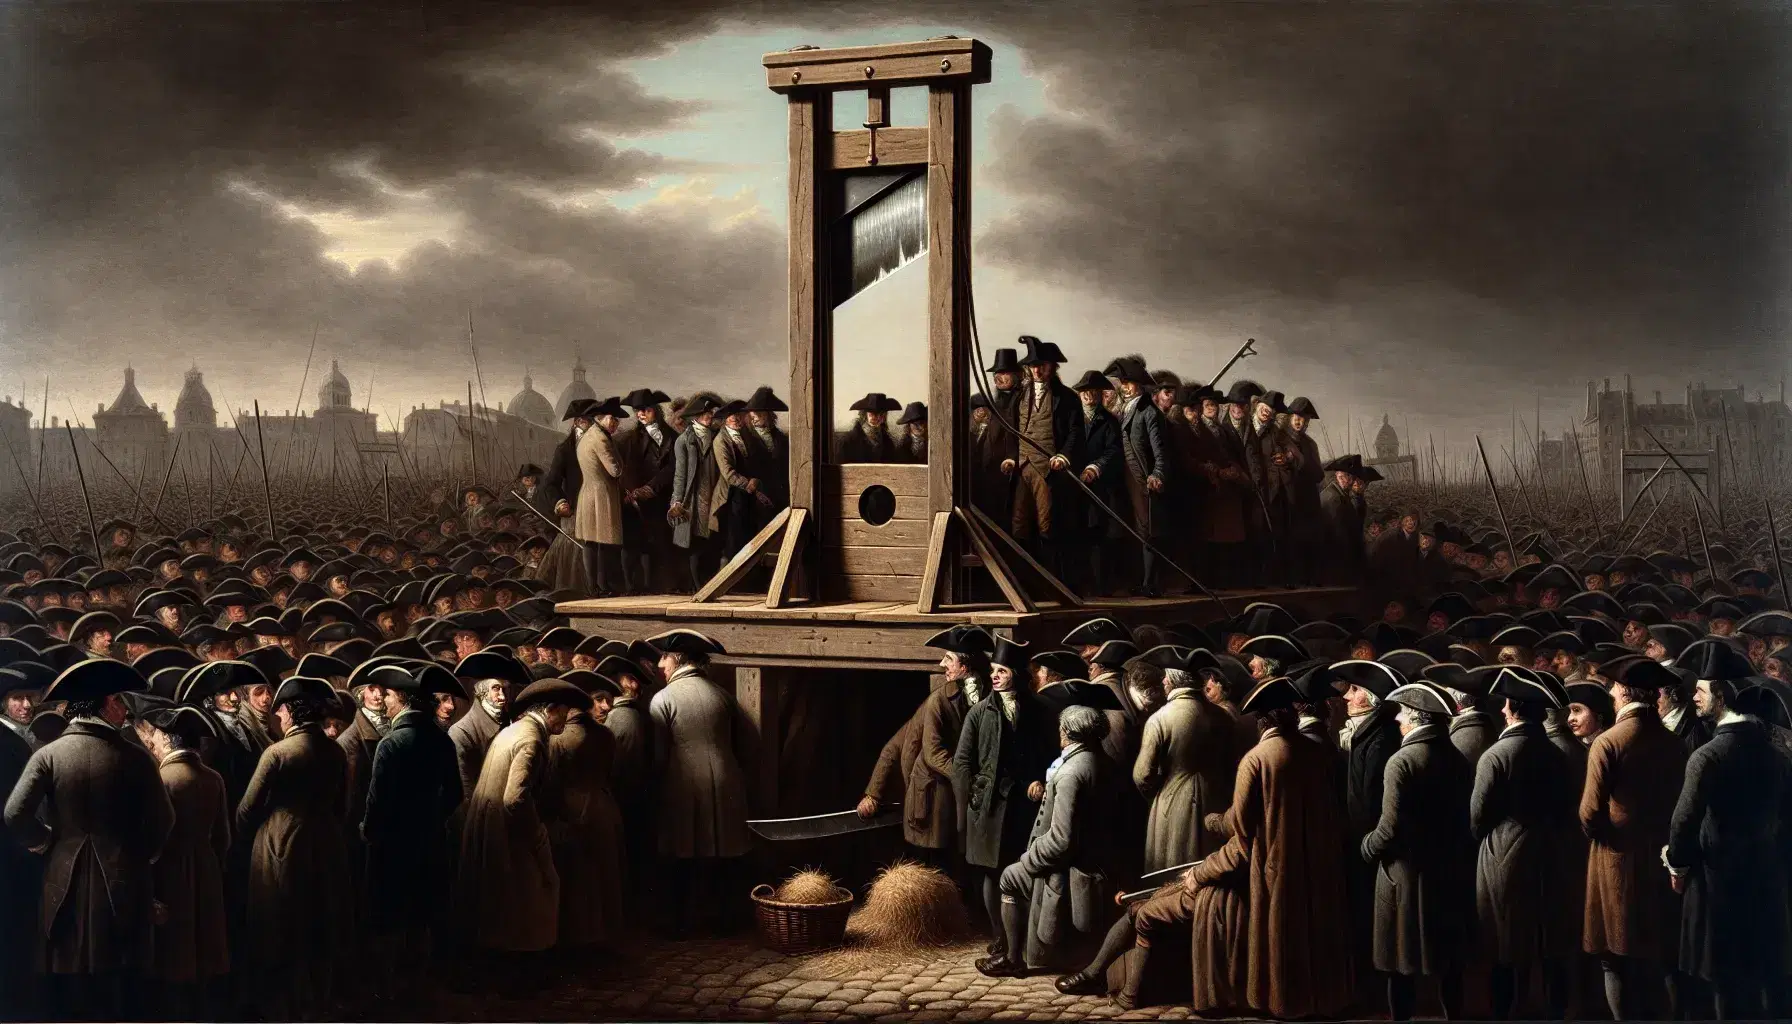 Guillotine on a wooden platform with a hay-filled basket beneath, surrounded by a faceless crowd, against a backdrop of 18th-century Parisian skyline under a gray sky.